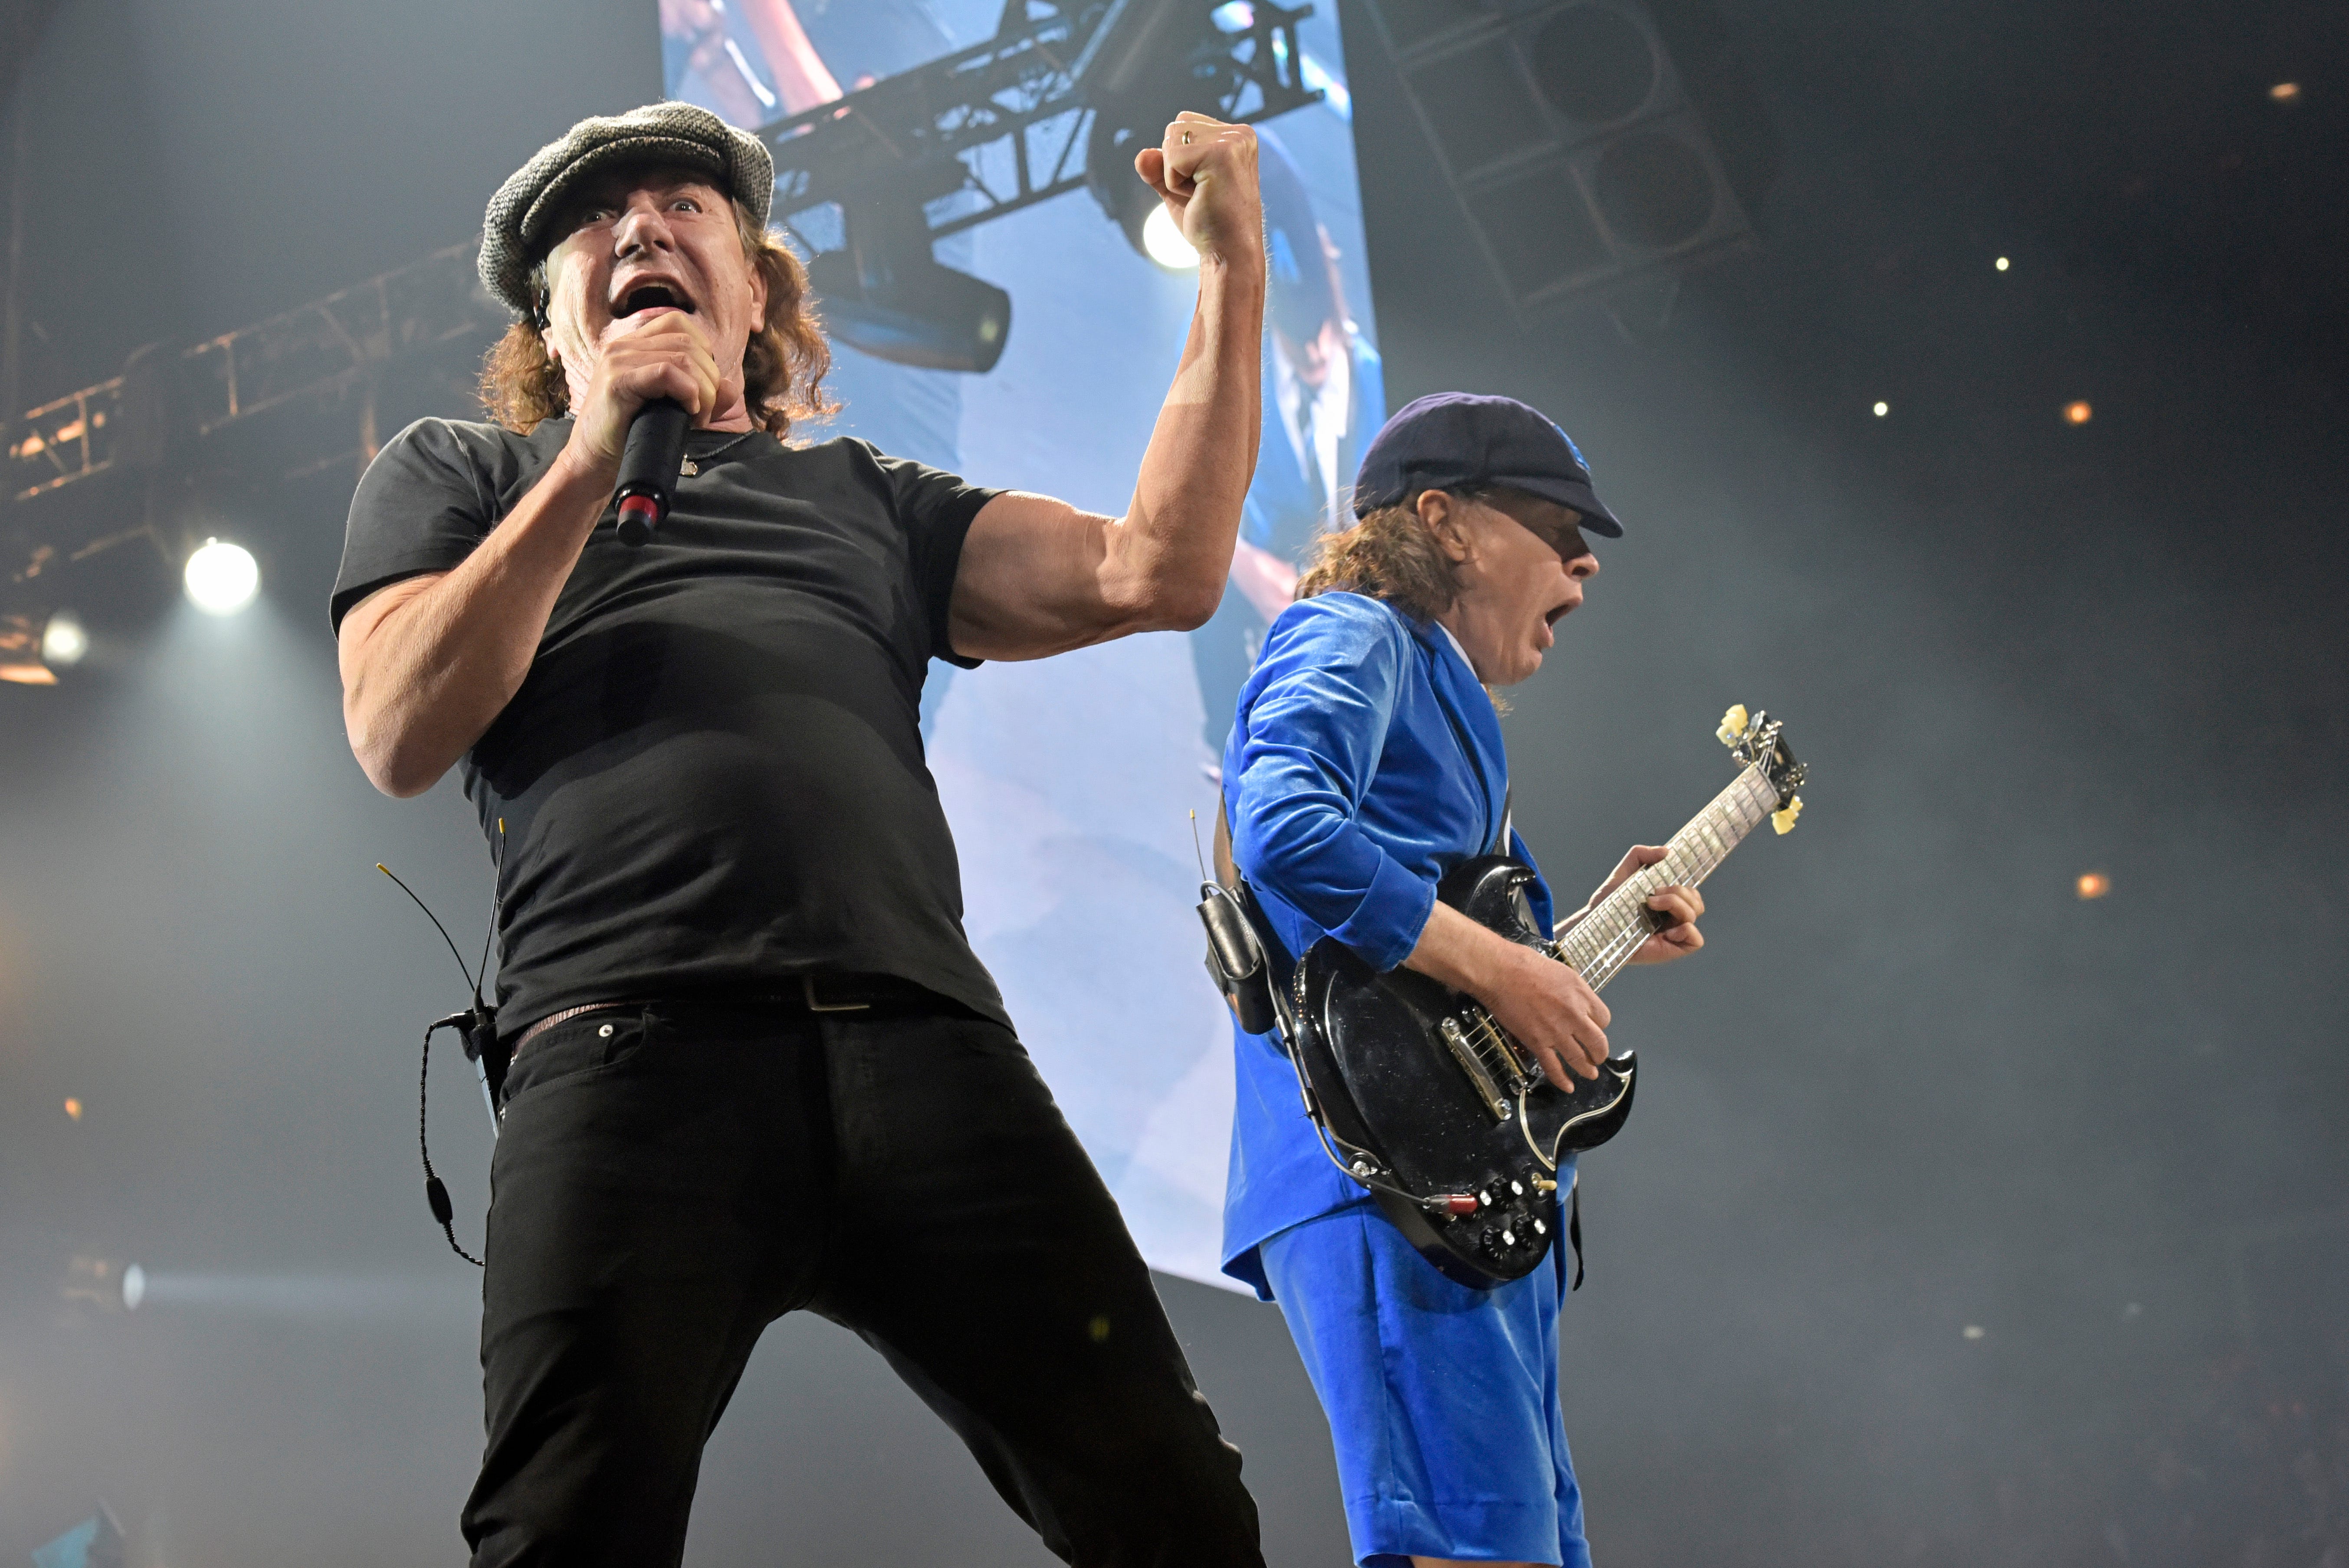 Proportional hugge Mansion AC/DC talk reuniting after health scares, loss: 'I missed the boys'